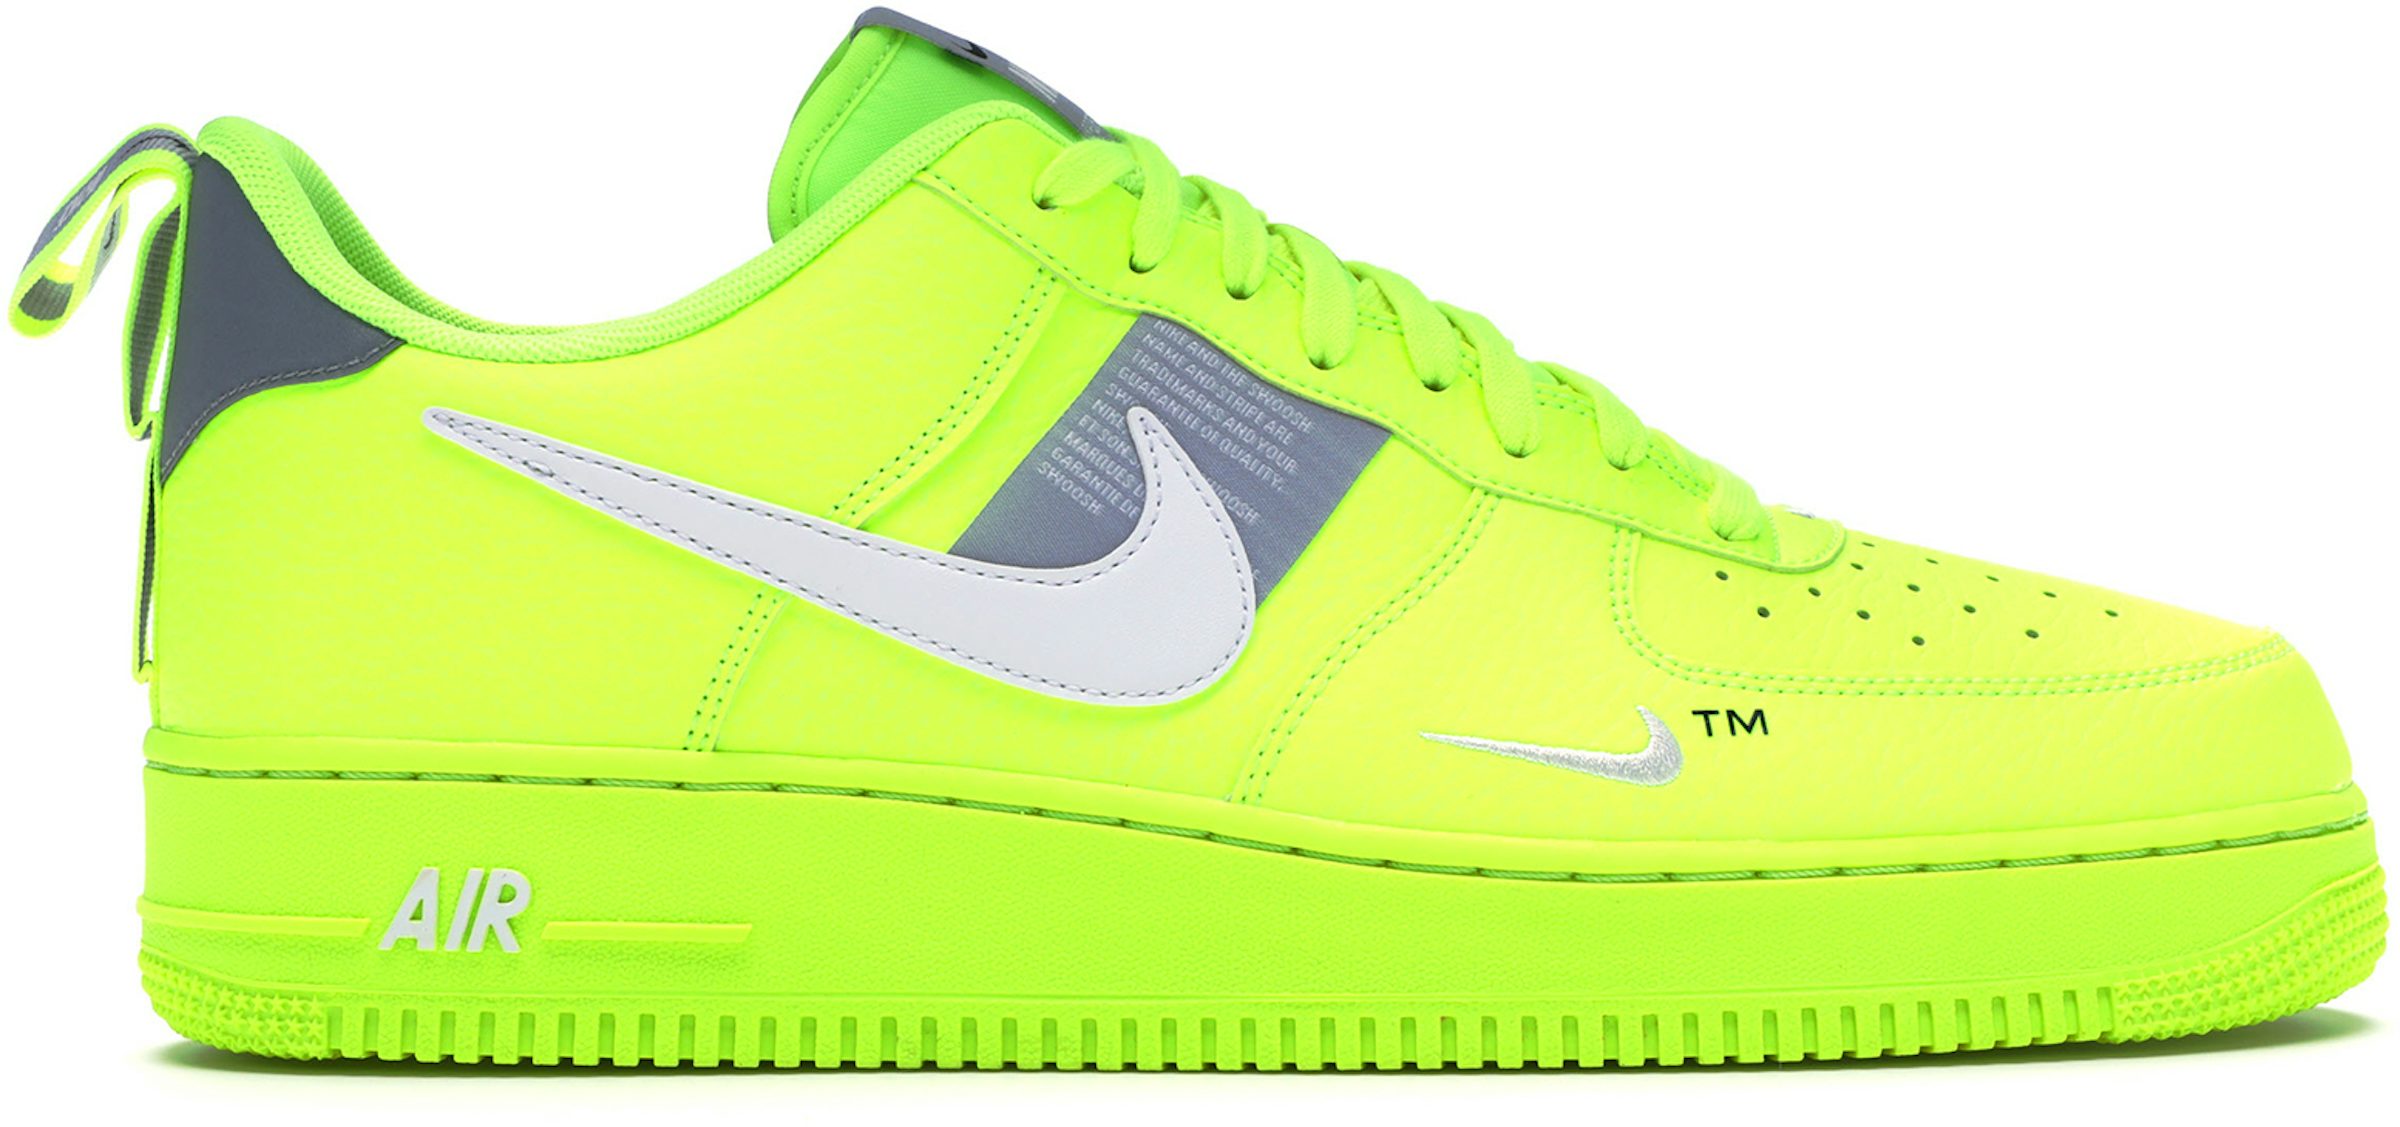 Sports Outdoor Nike Air Force 1 Utility Volt Green Men''''s Running Shoes